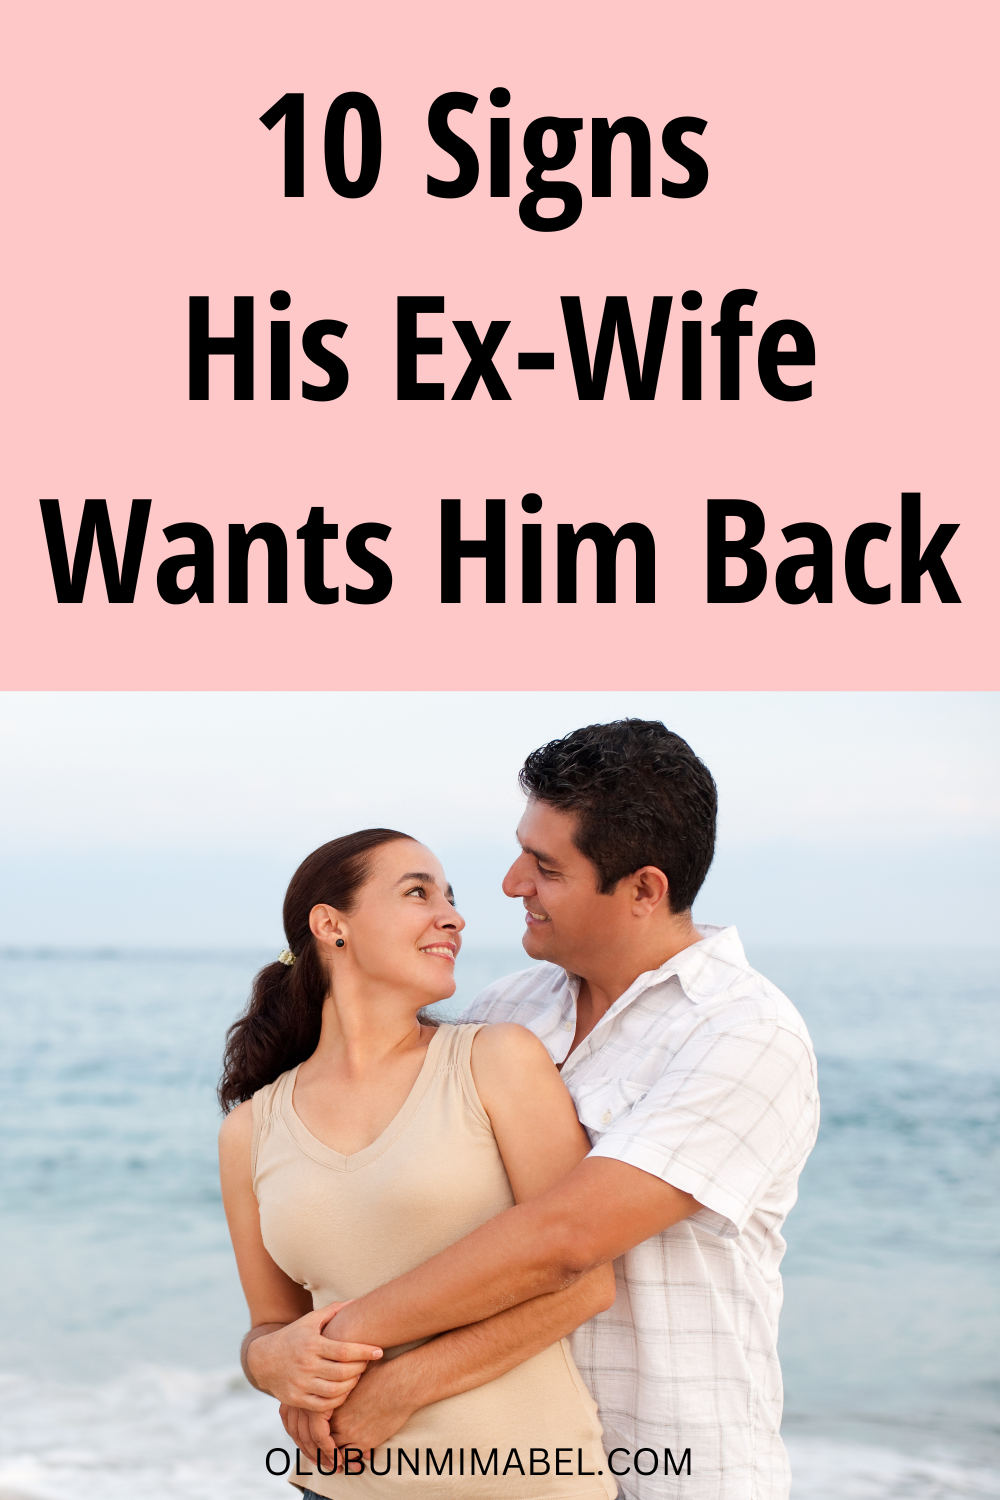  Signs His Ex-Wife Wants Him Back